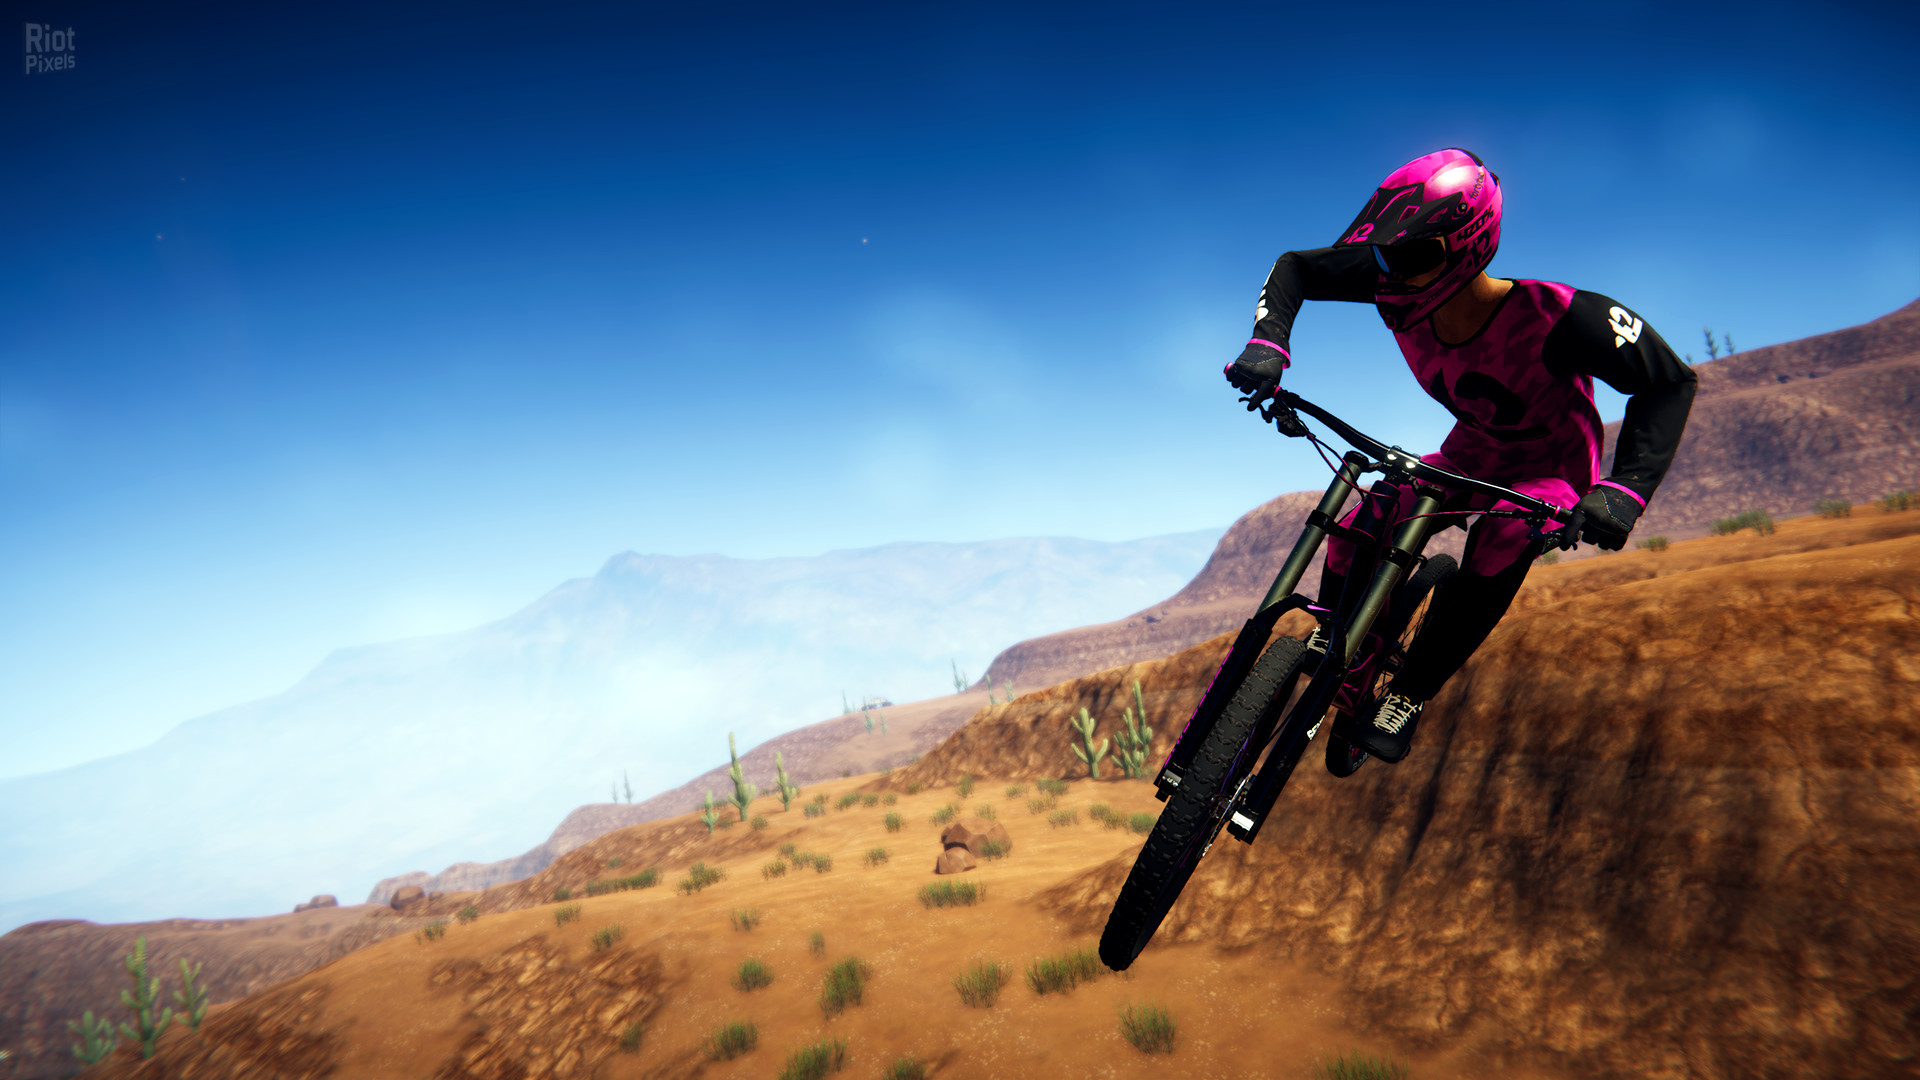 Descenders is coming to PS4 August 25th and Switch later this year